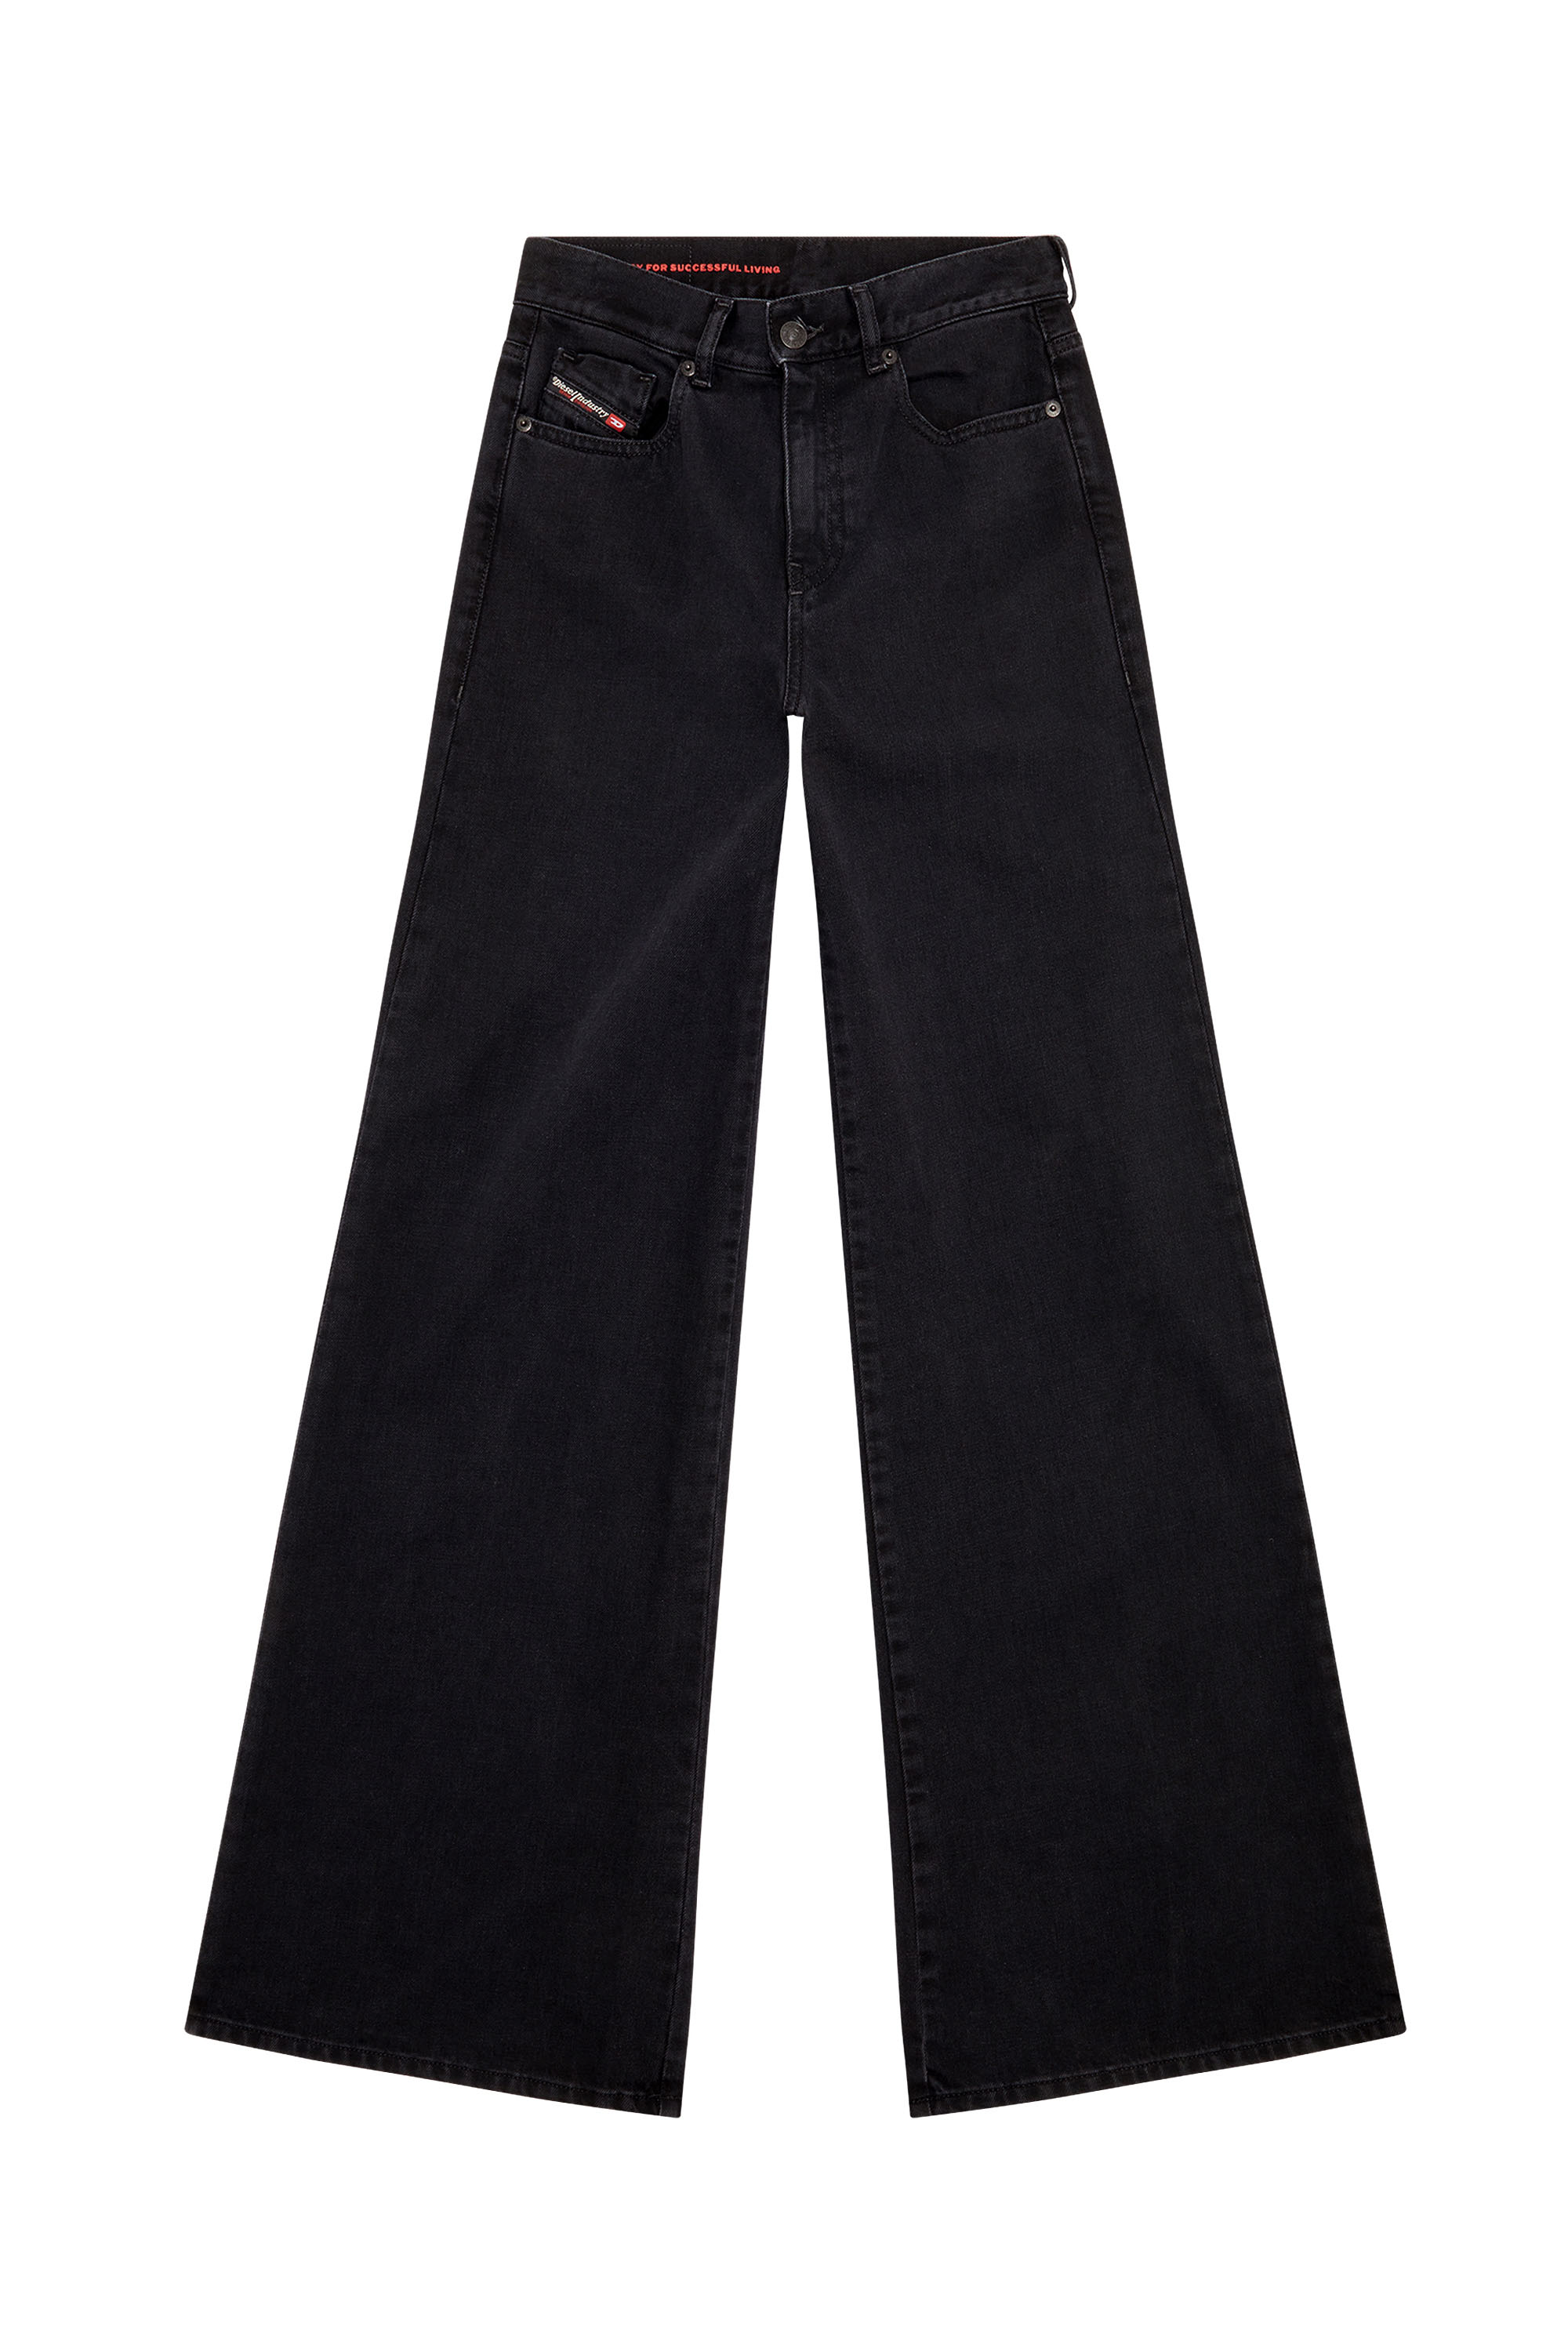 1978 Z09RL Bootcut and Flare Jeans, Schwarz/Dunkelgrau - Jeans